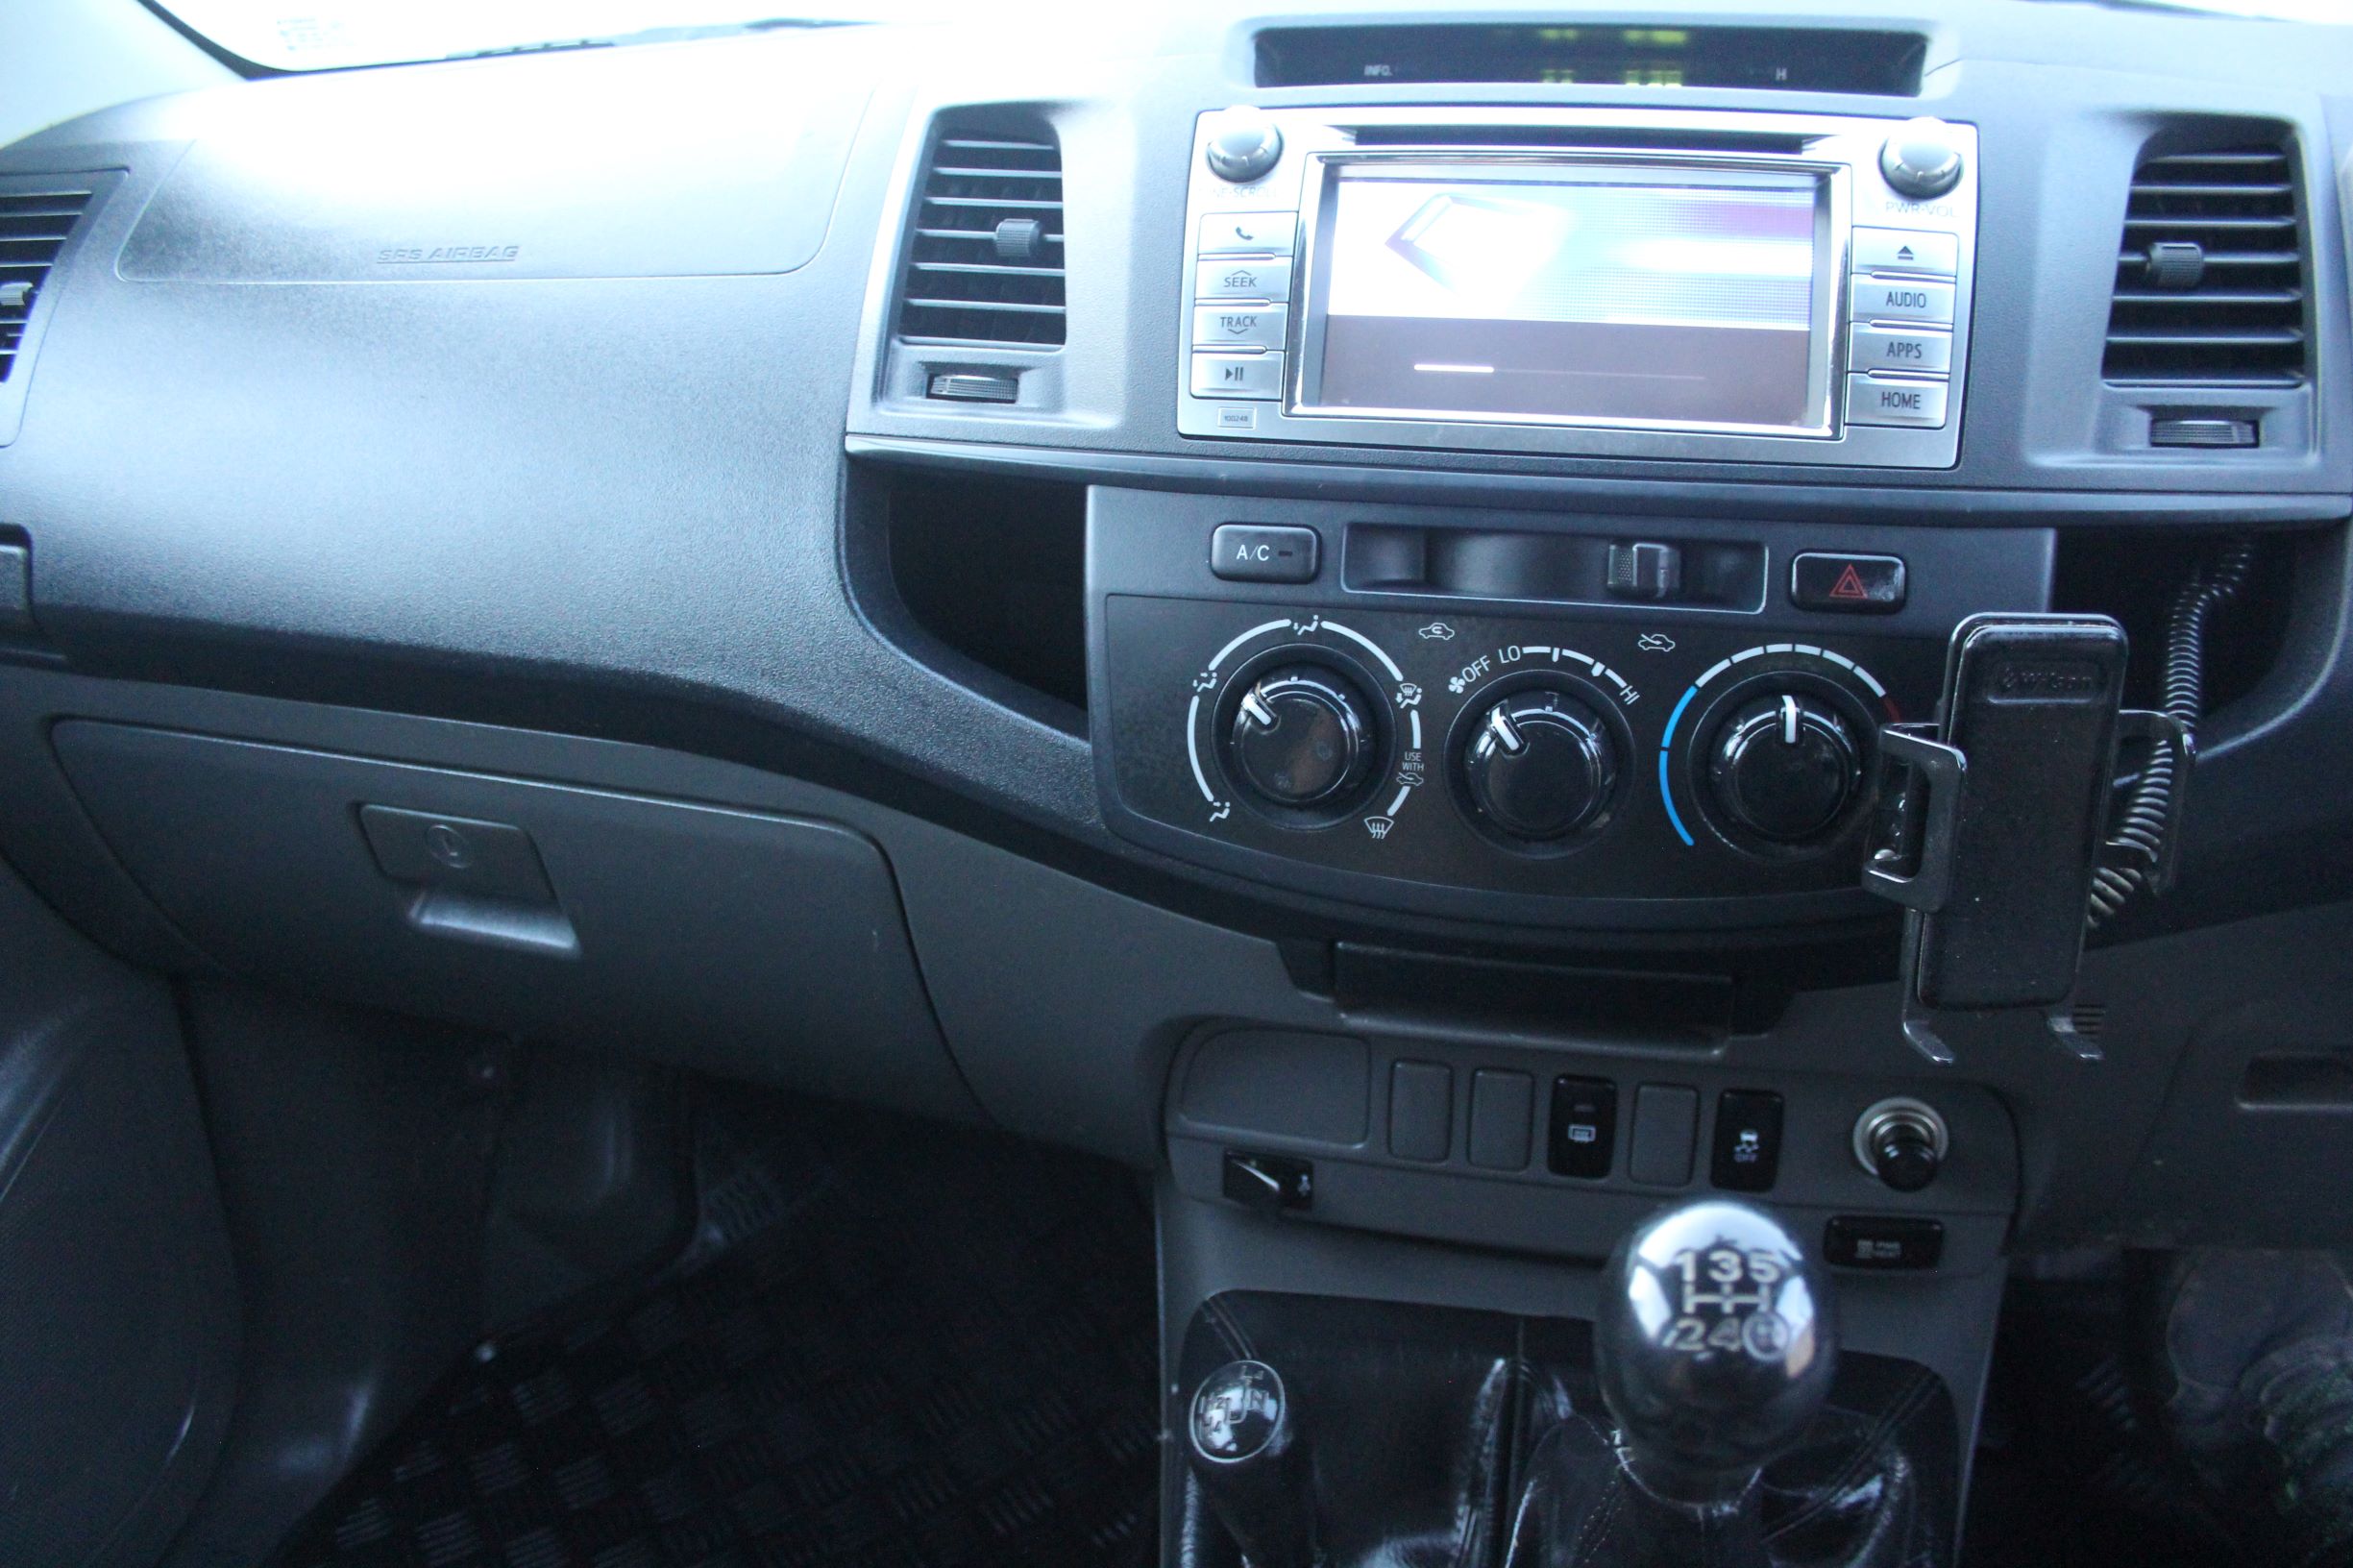 Toyota Hilux 4WD manual 2014 for sale in Auckland